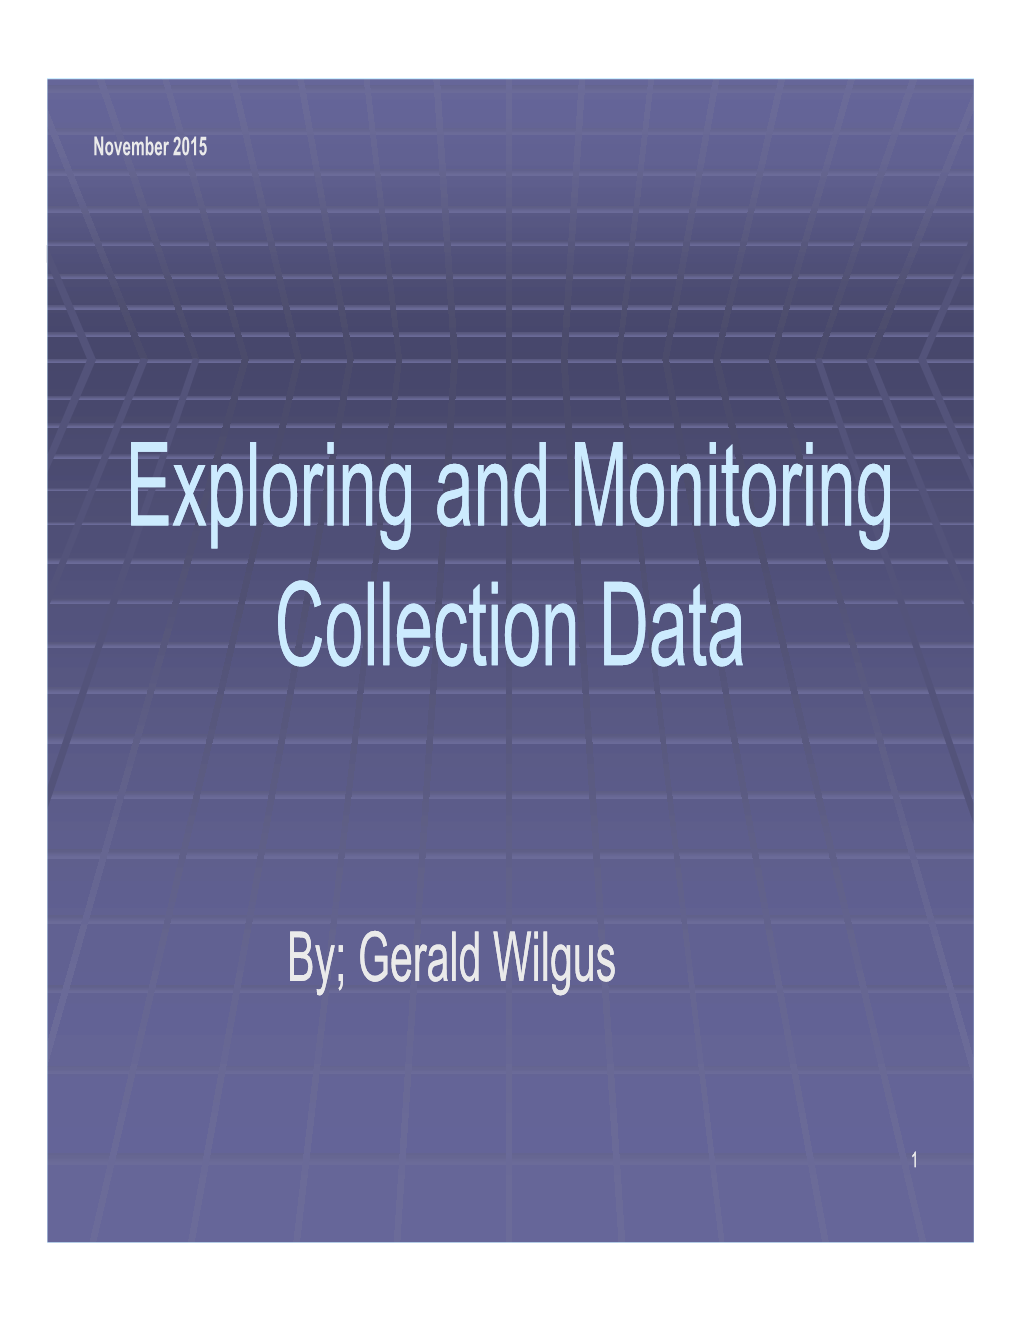 Exploring and Monitoring Collection Data Using Simple Statistics